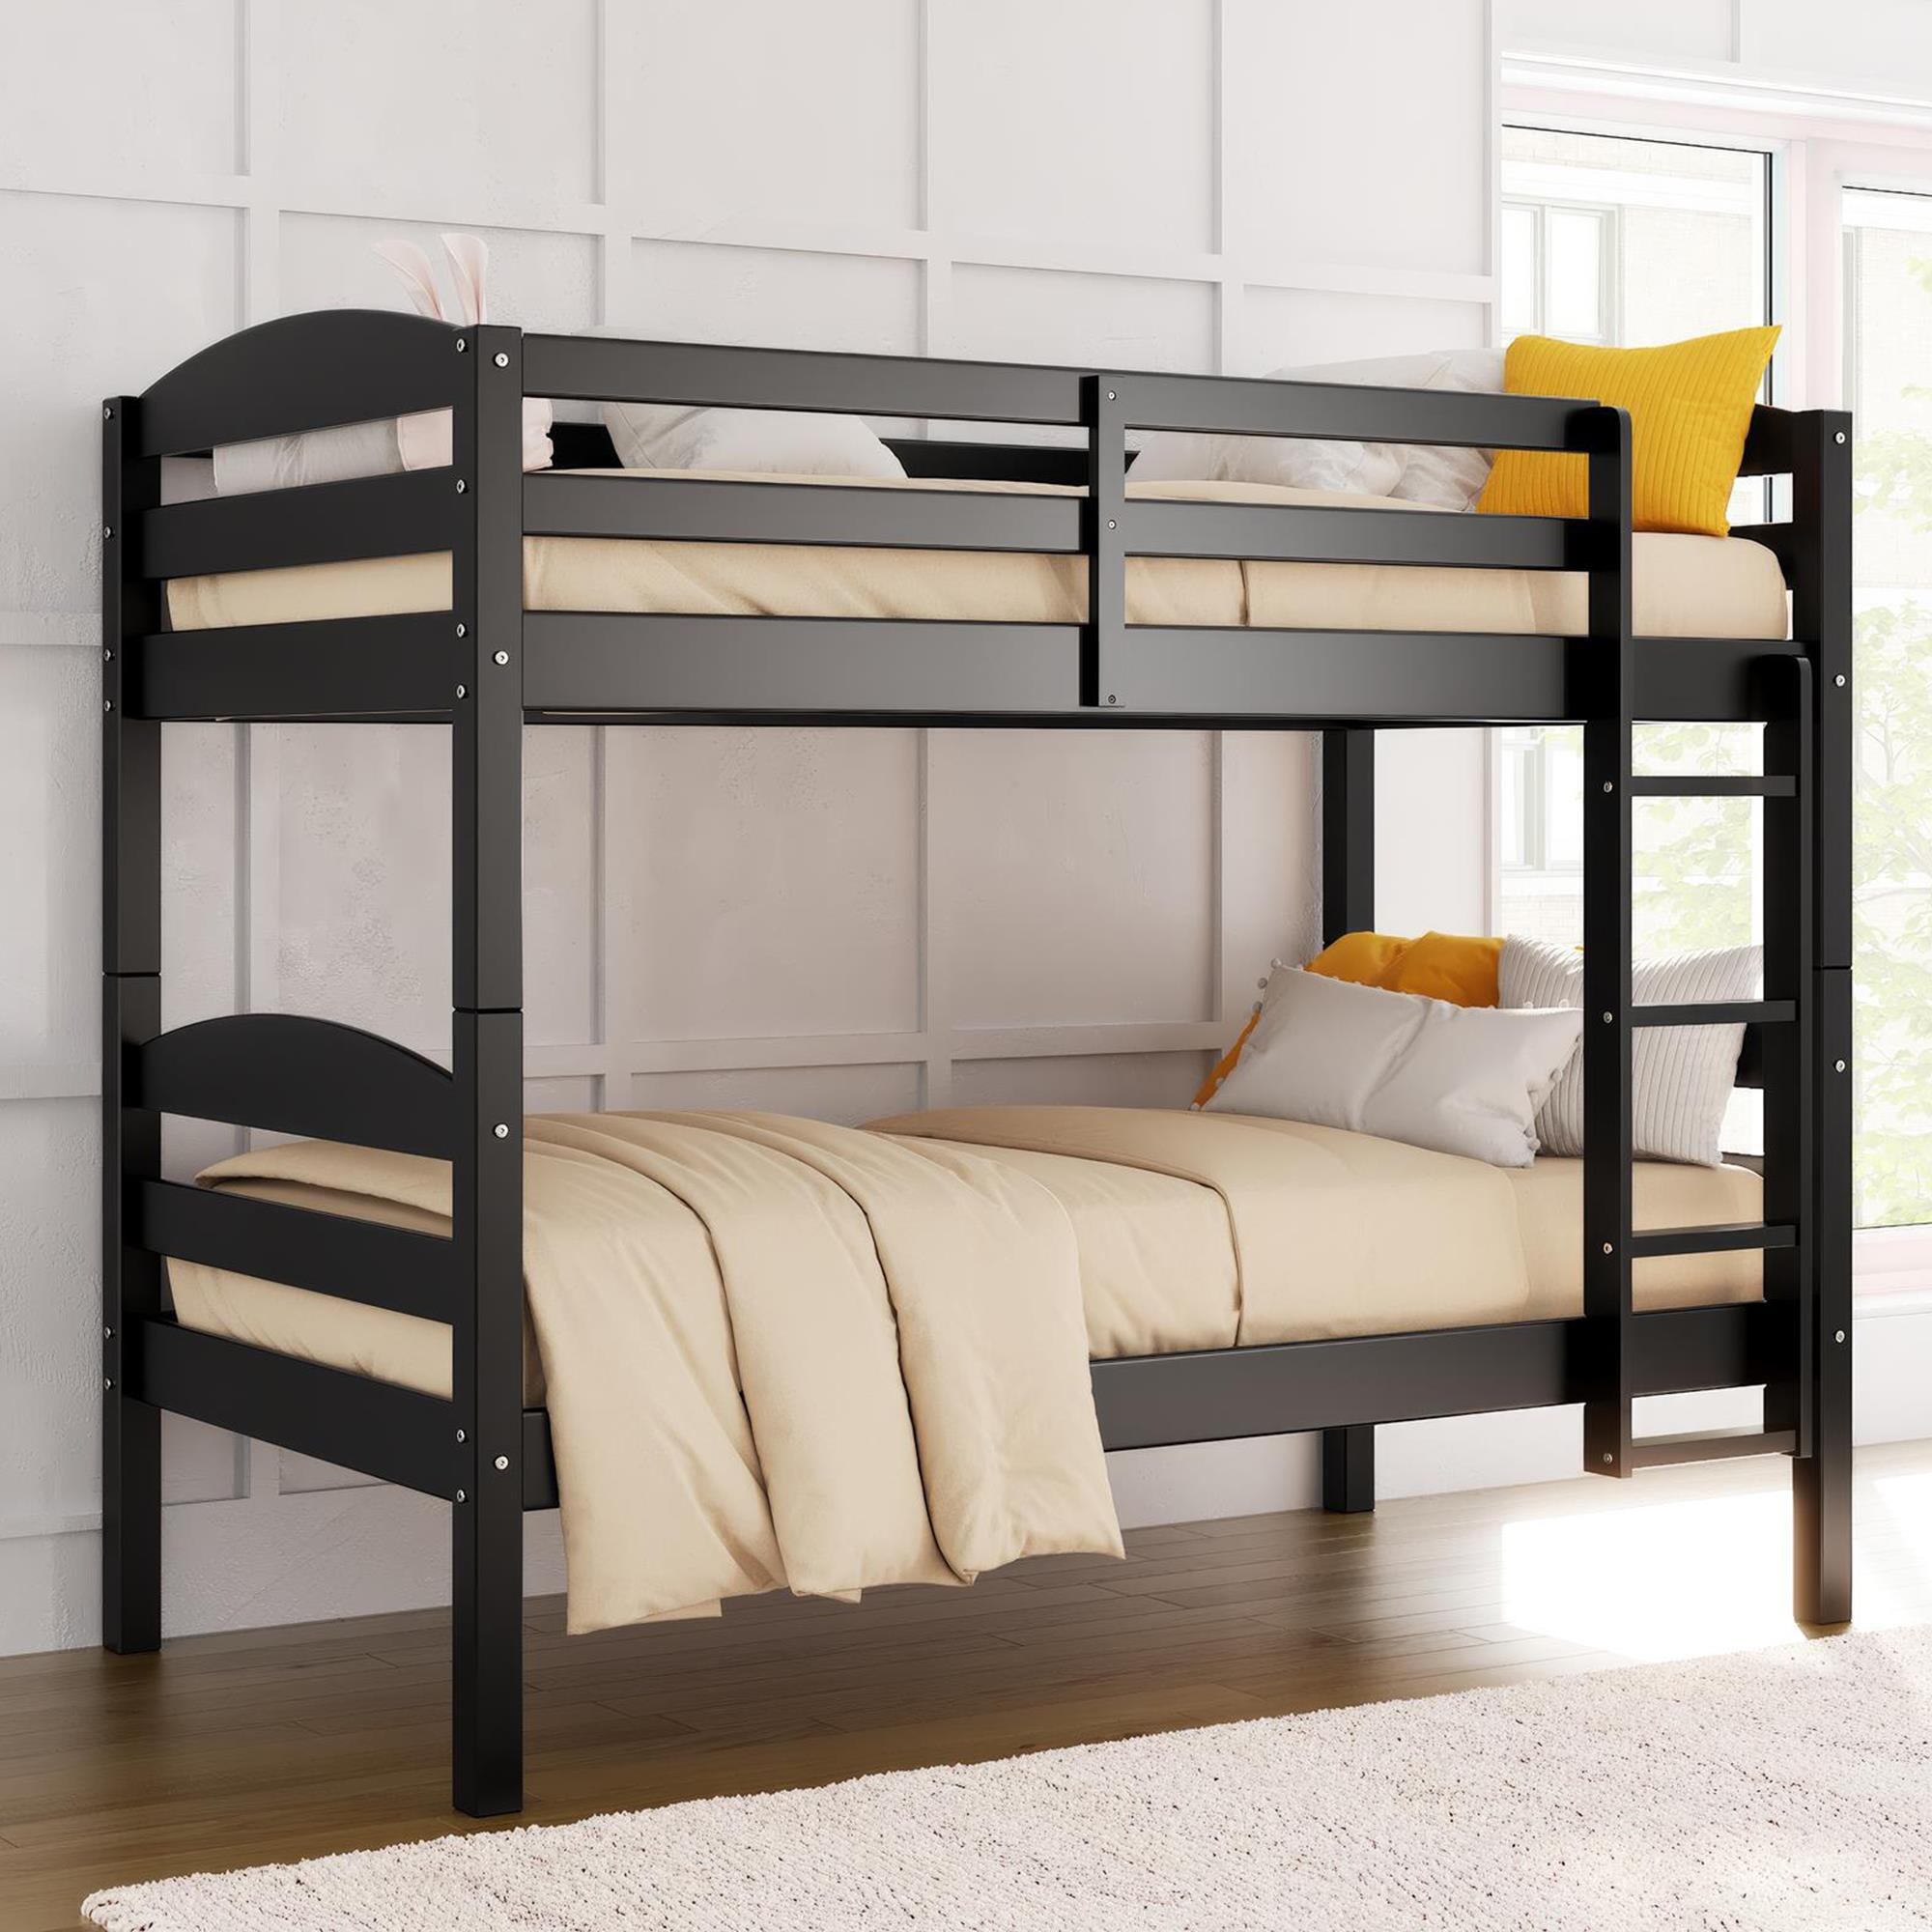 Better Homes & Gardens Leighton Kids Solid Wood Twin-over-Twin Convertible Bunk Bed with Ladder and Guardrails, Black - image 1 of 11